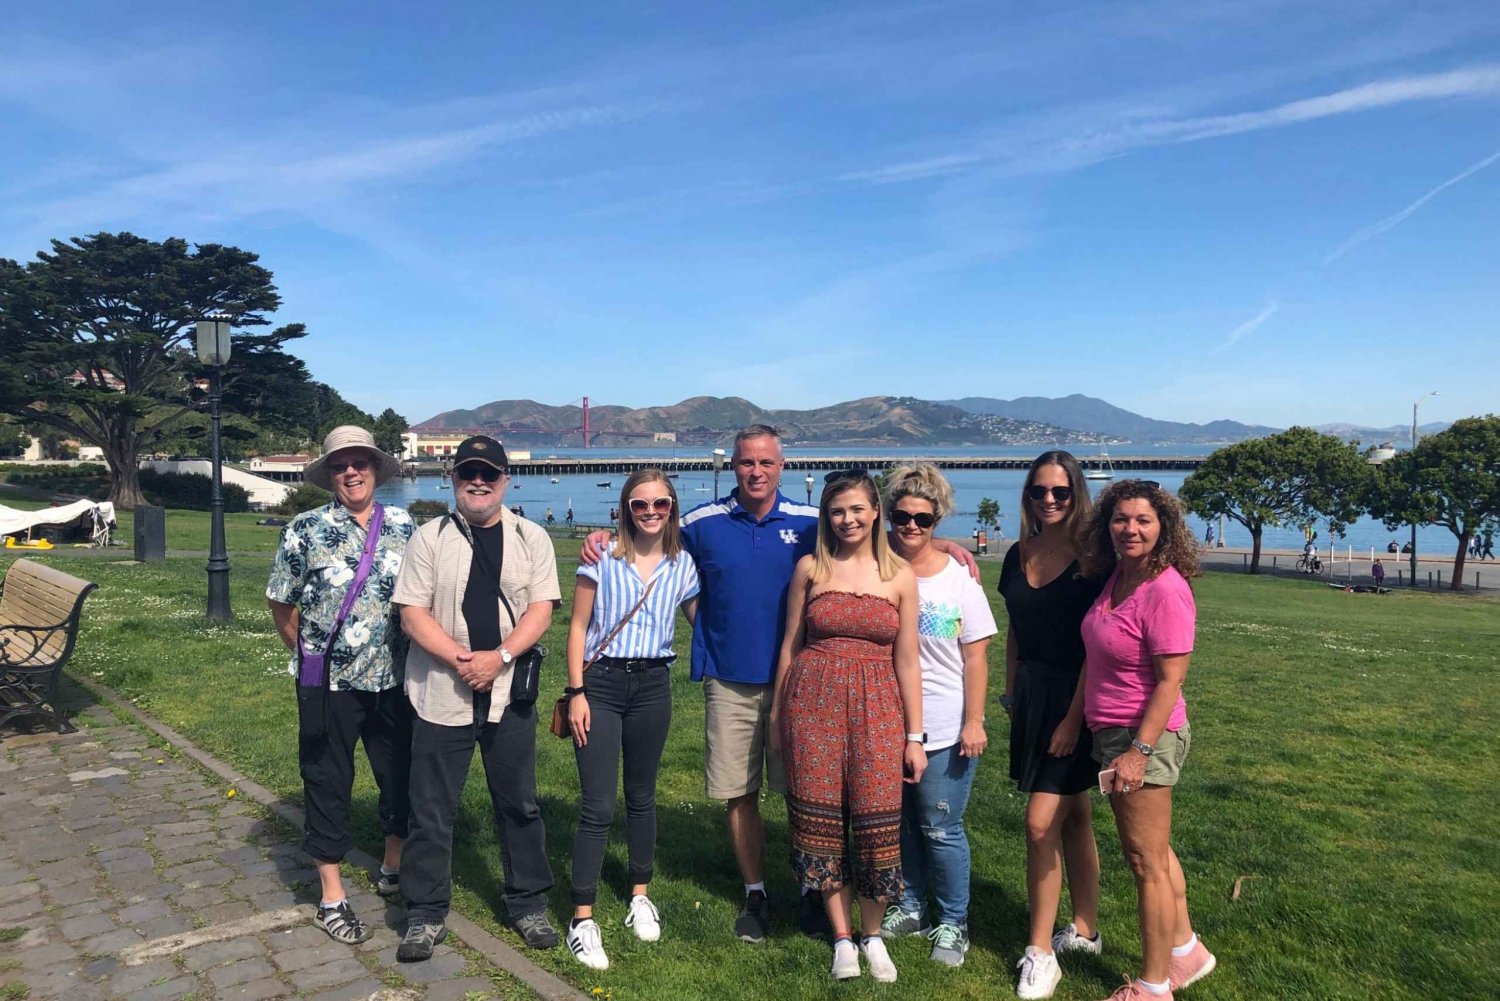 San Francisco: Waterfront Guided Tour and Alcatraz Ticket